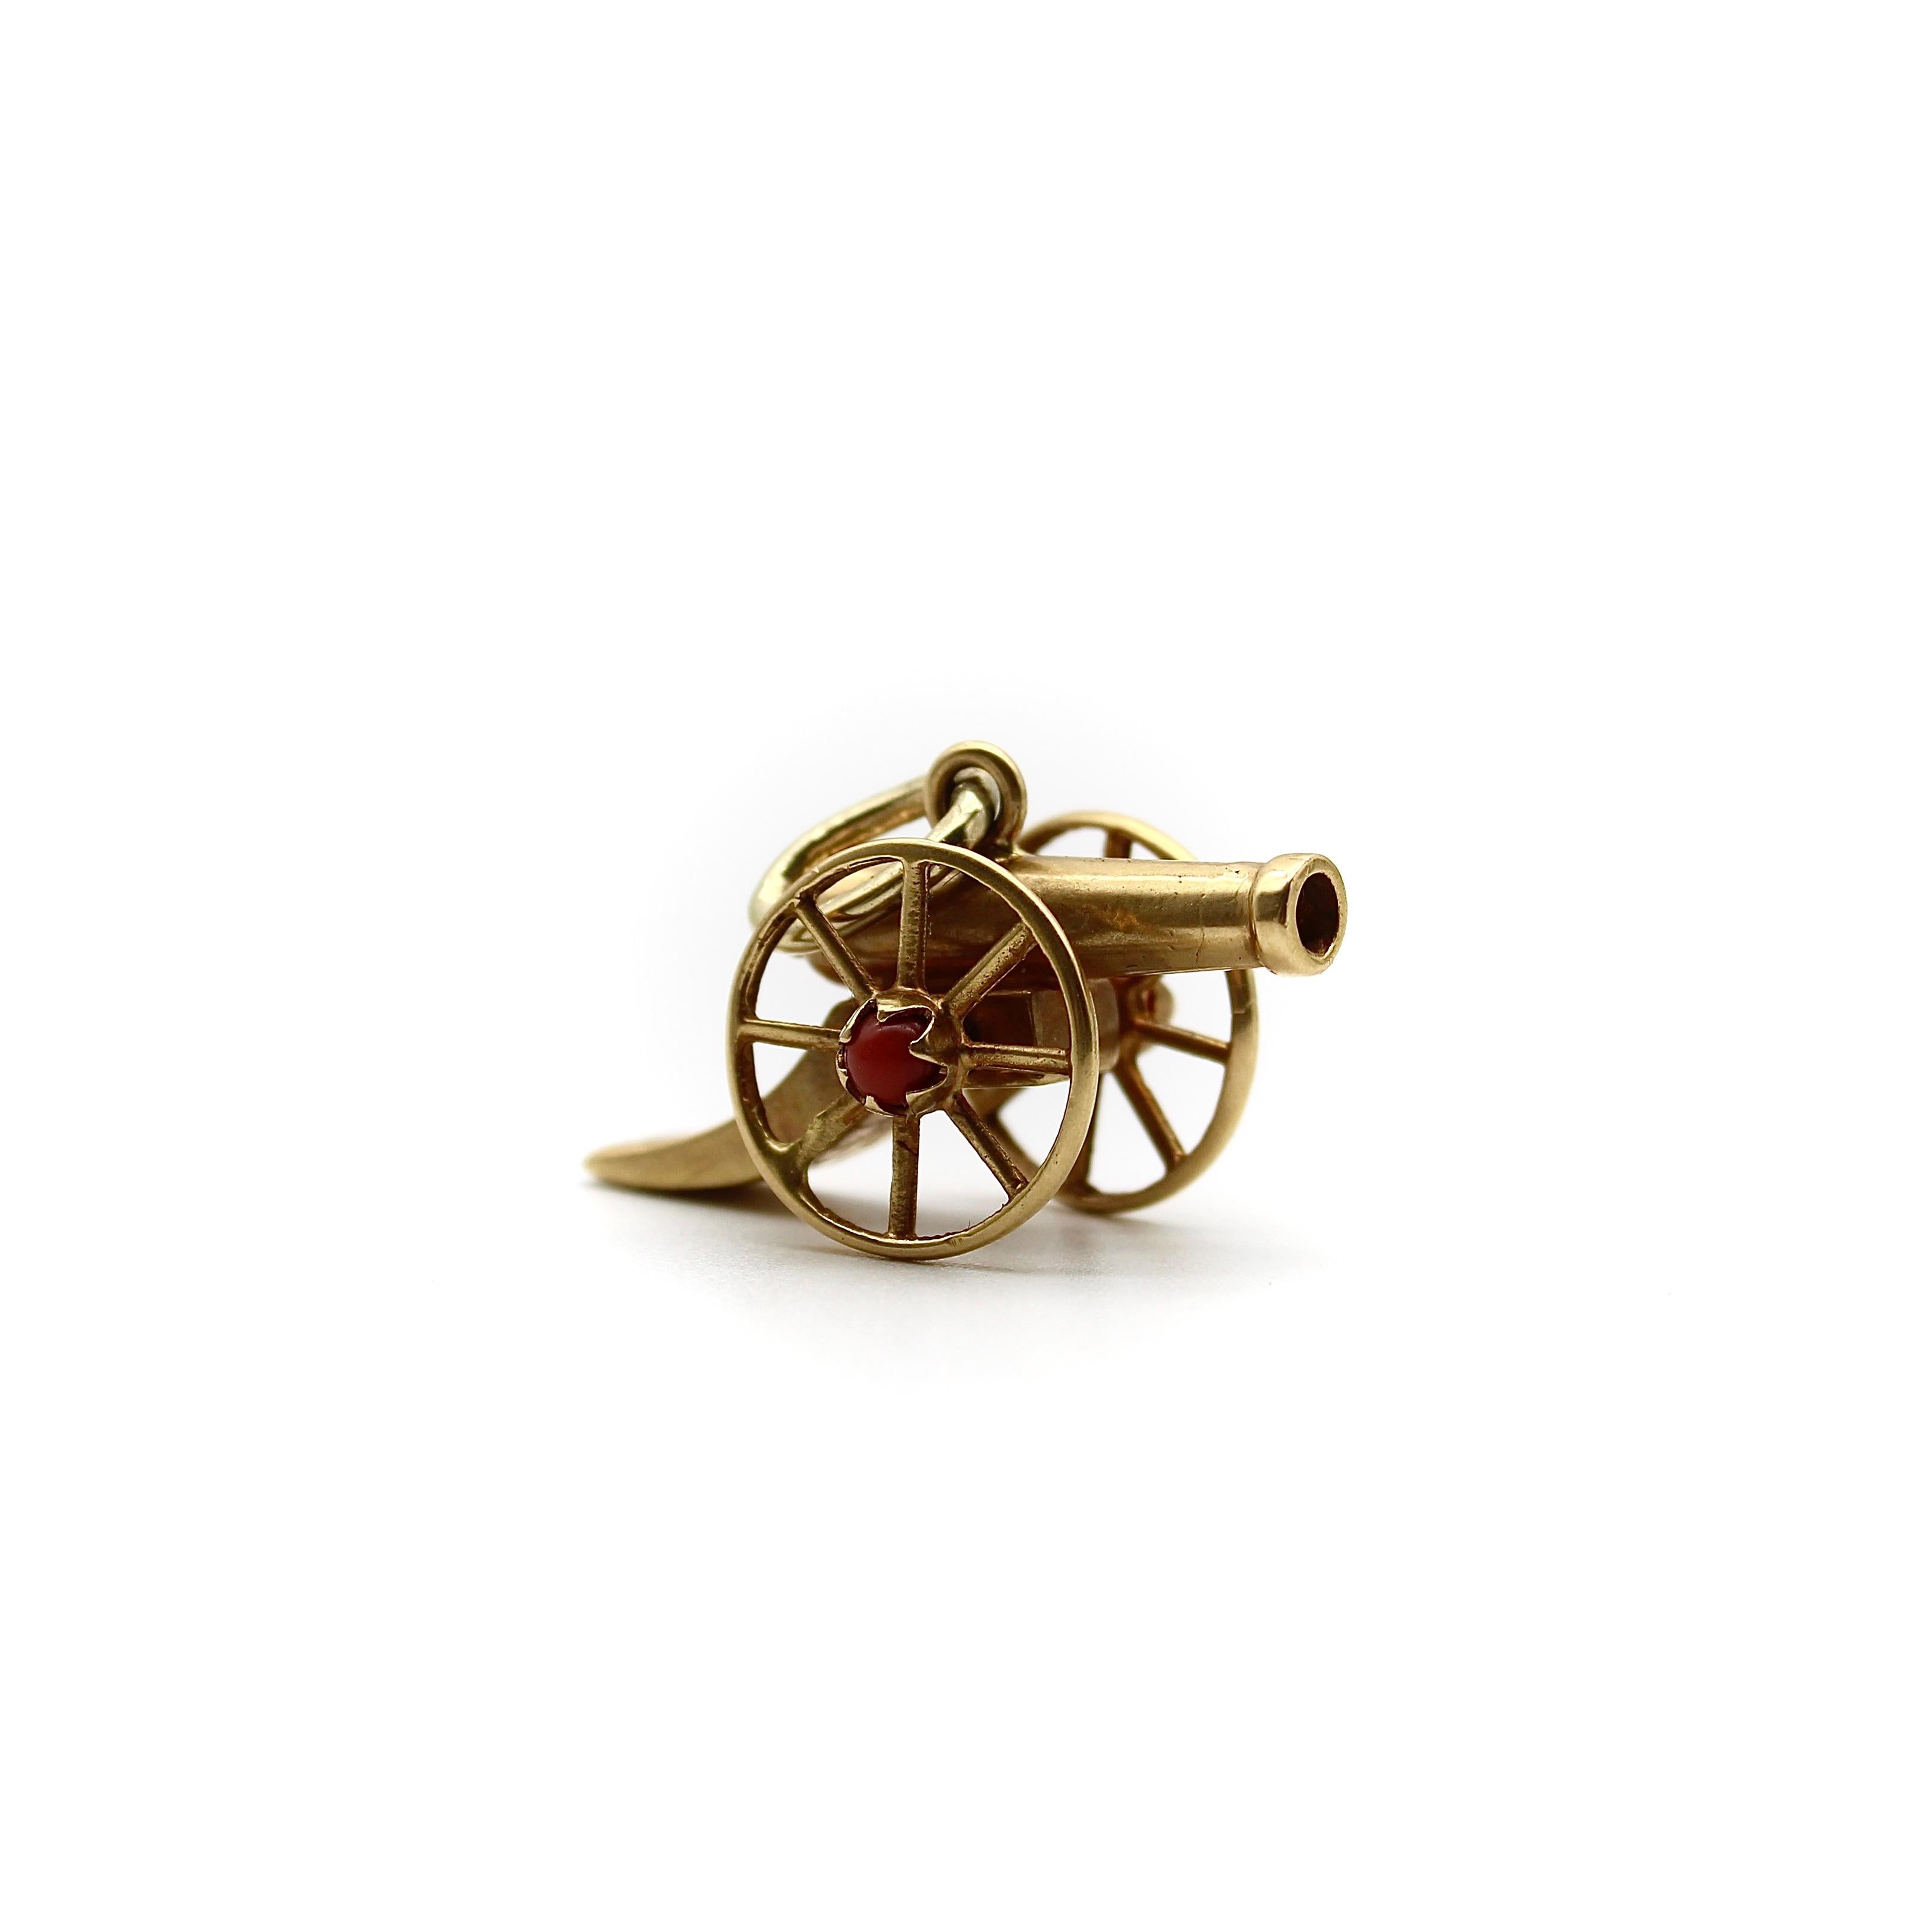 This 18k gold Victorian charm is shaped like a cannon, with articulated moving parts that allow the wheels to roll. The charm has intricate detail, incised with delicate leaf foliates on both the top and bottom of the cannon. Each wheel is capped